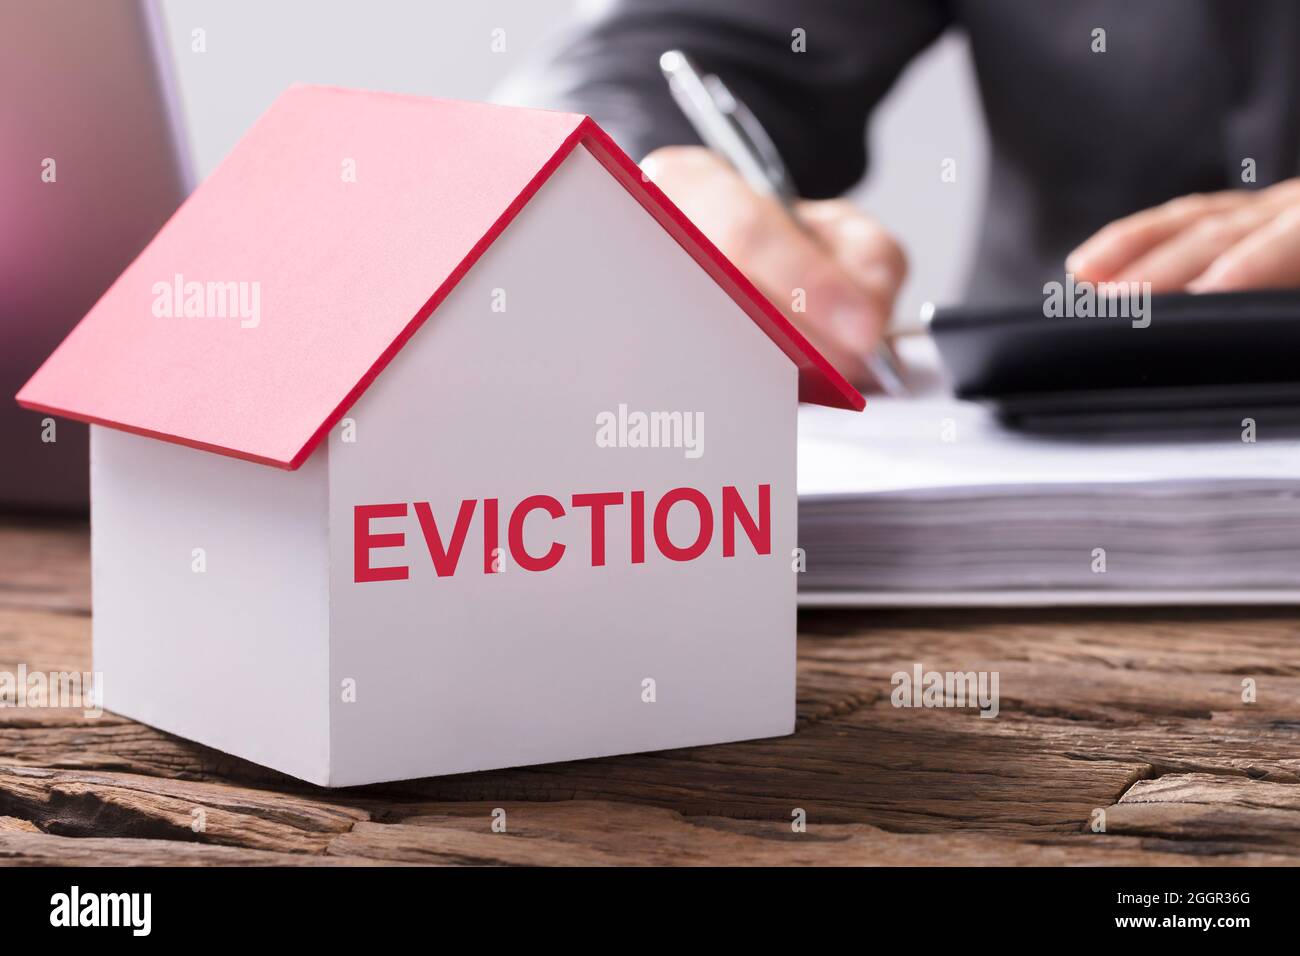 Home Eviction. Tenant Evicted From House. Debt Document Stock Photo